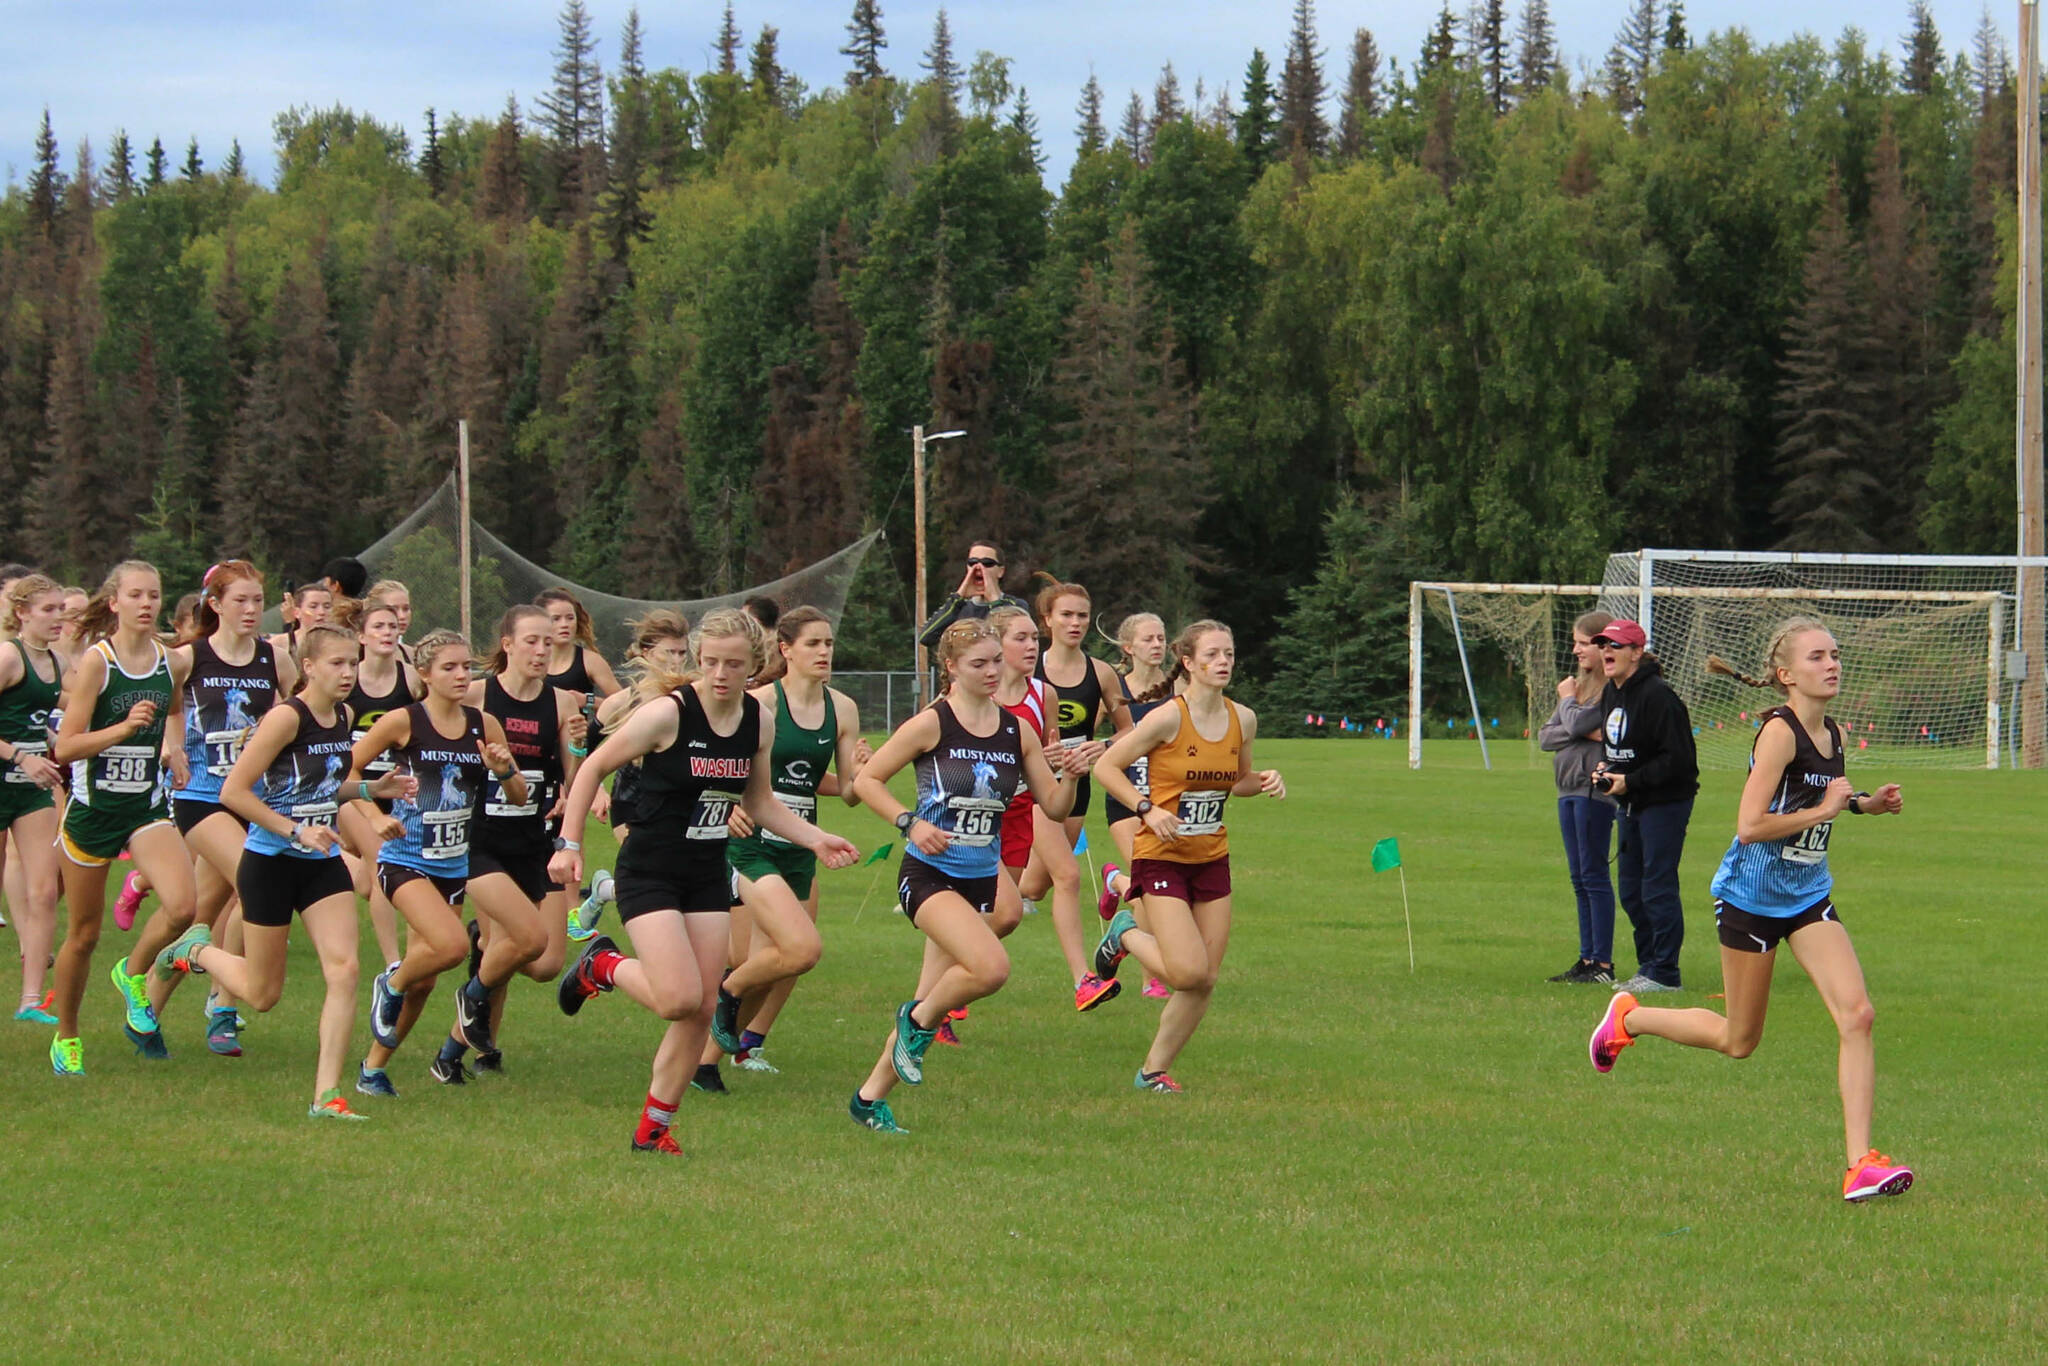 Chugiak High School’s Cameron Peterson (right) leads the girls varsity pack at the 2022 Ted McKenney XC Running Invitational at Tsalteshi Trails at Skyview Middle School on Saturday, Aug. 20, 2022, in Soldotna, Alaska. (Ashlyn O’Hara/Peninsula Clarion)